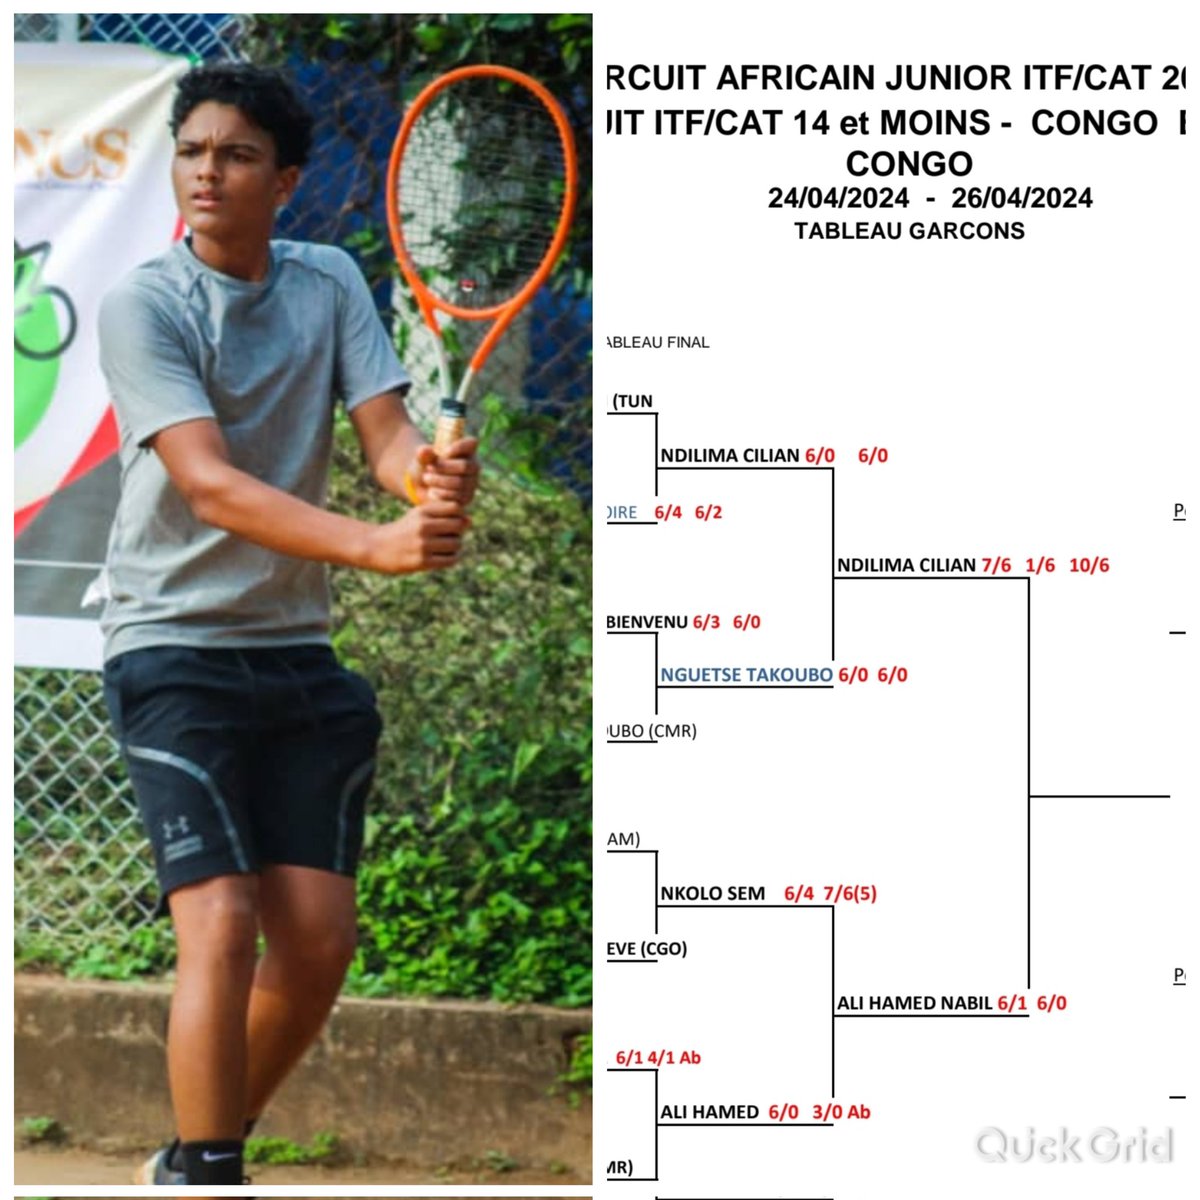 Congratulations to my son Cillian on reaching the finals in both singles and doubles at the @ITFTennis /Confederation of Africa 14 and Under tournament in Congo Brazzaville. Will be with you in spirit when you play the final tommorow. Proud of you my not so little friend❤. The…